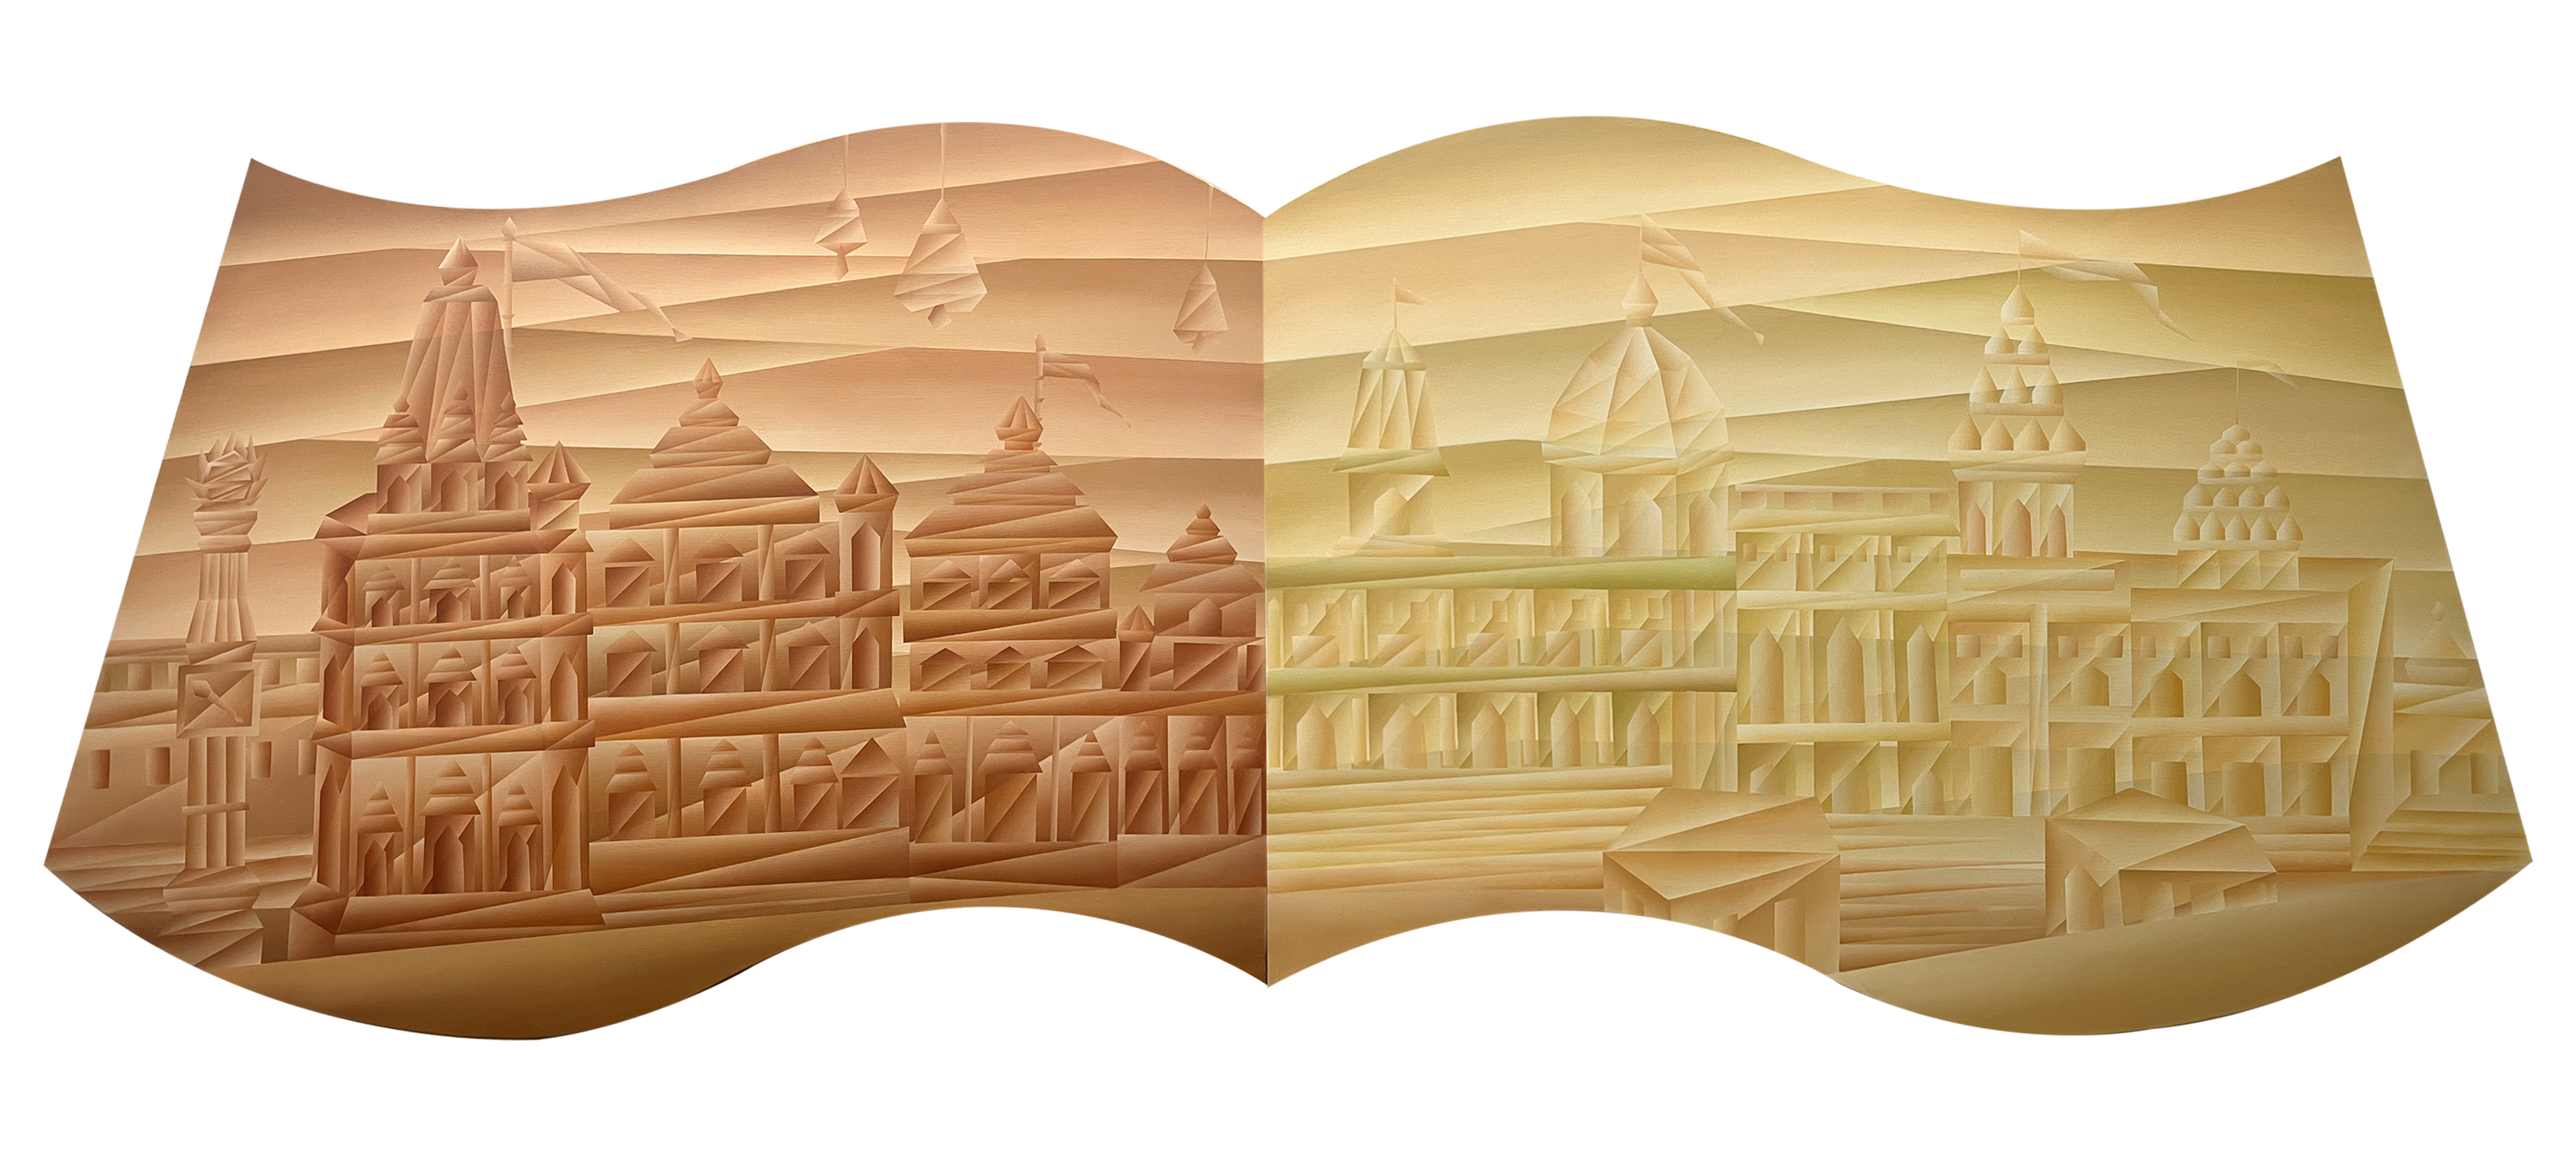 Ayodhya (The new chapter) diptych